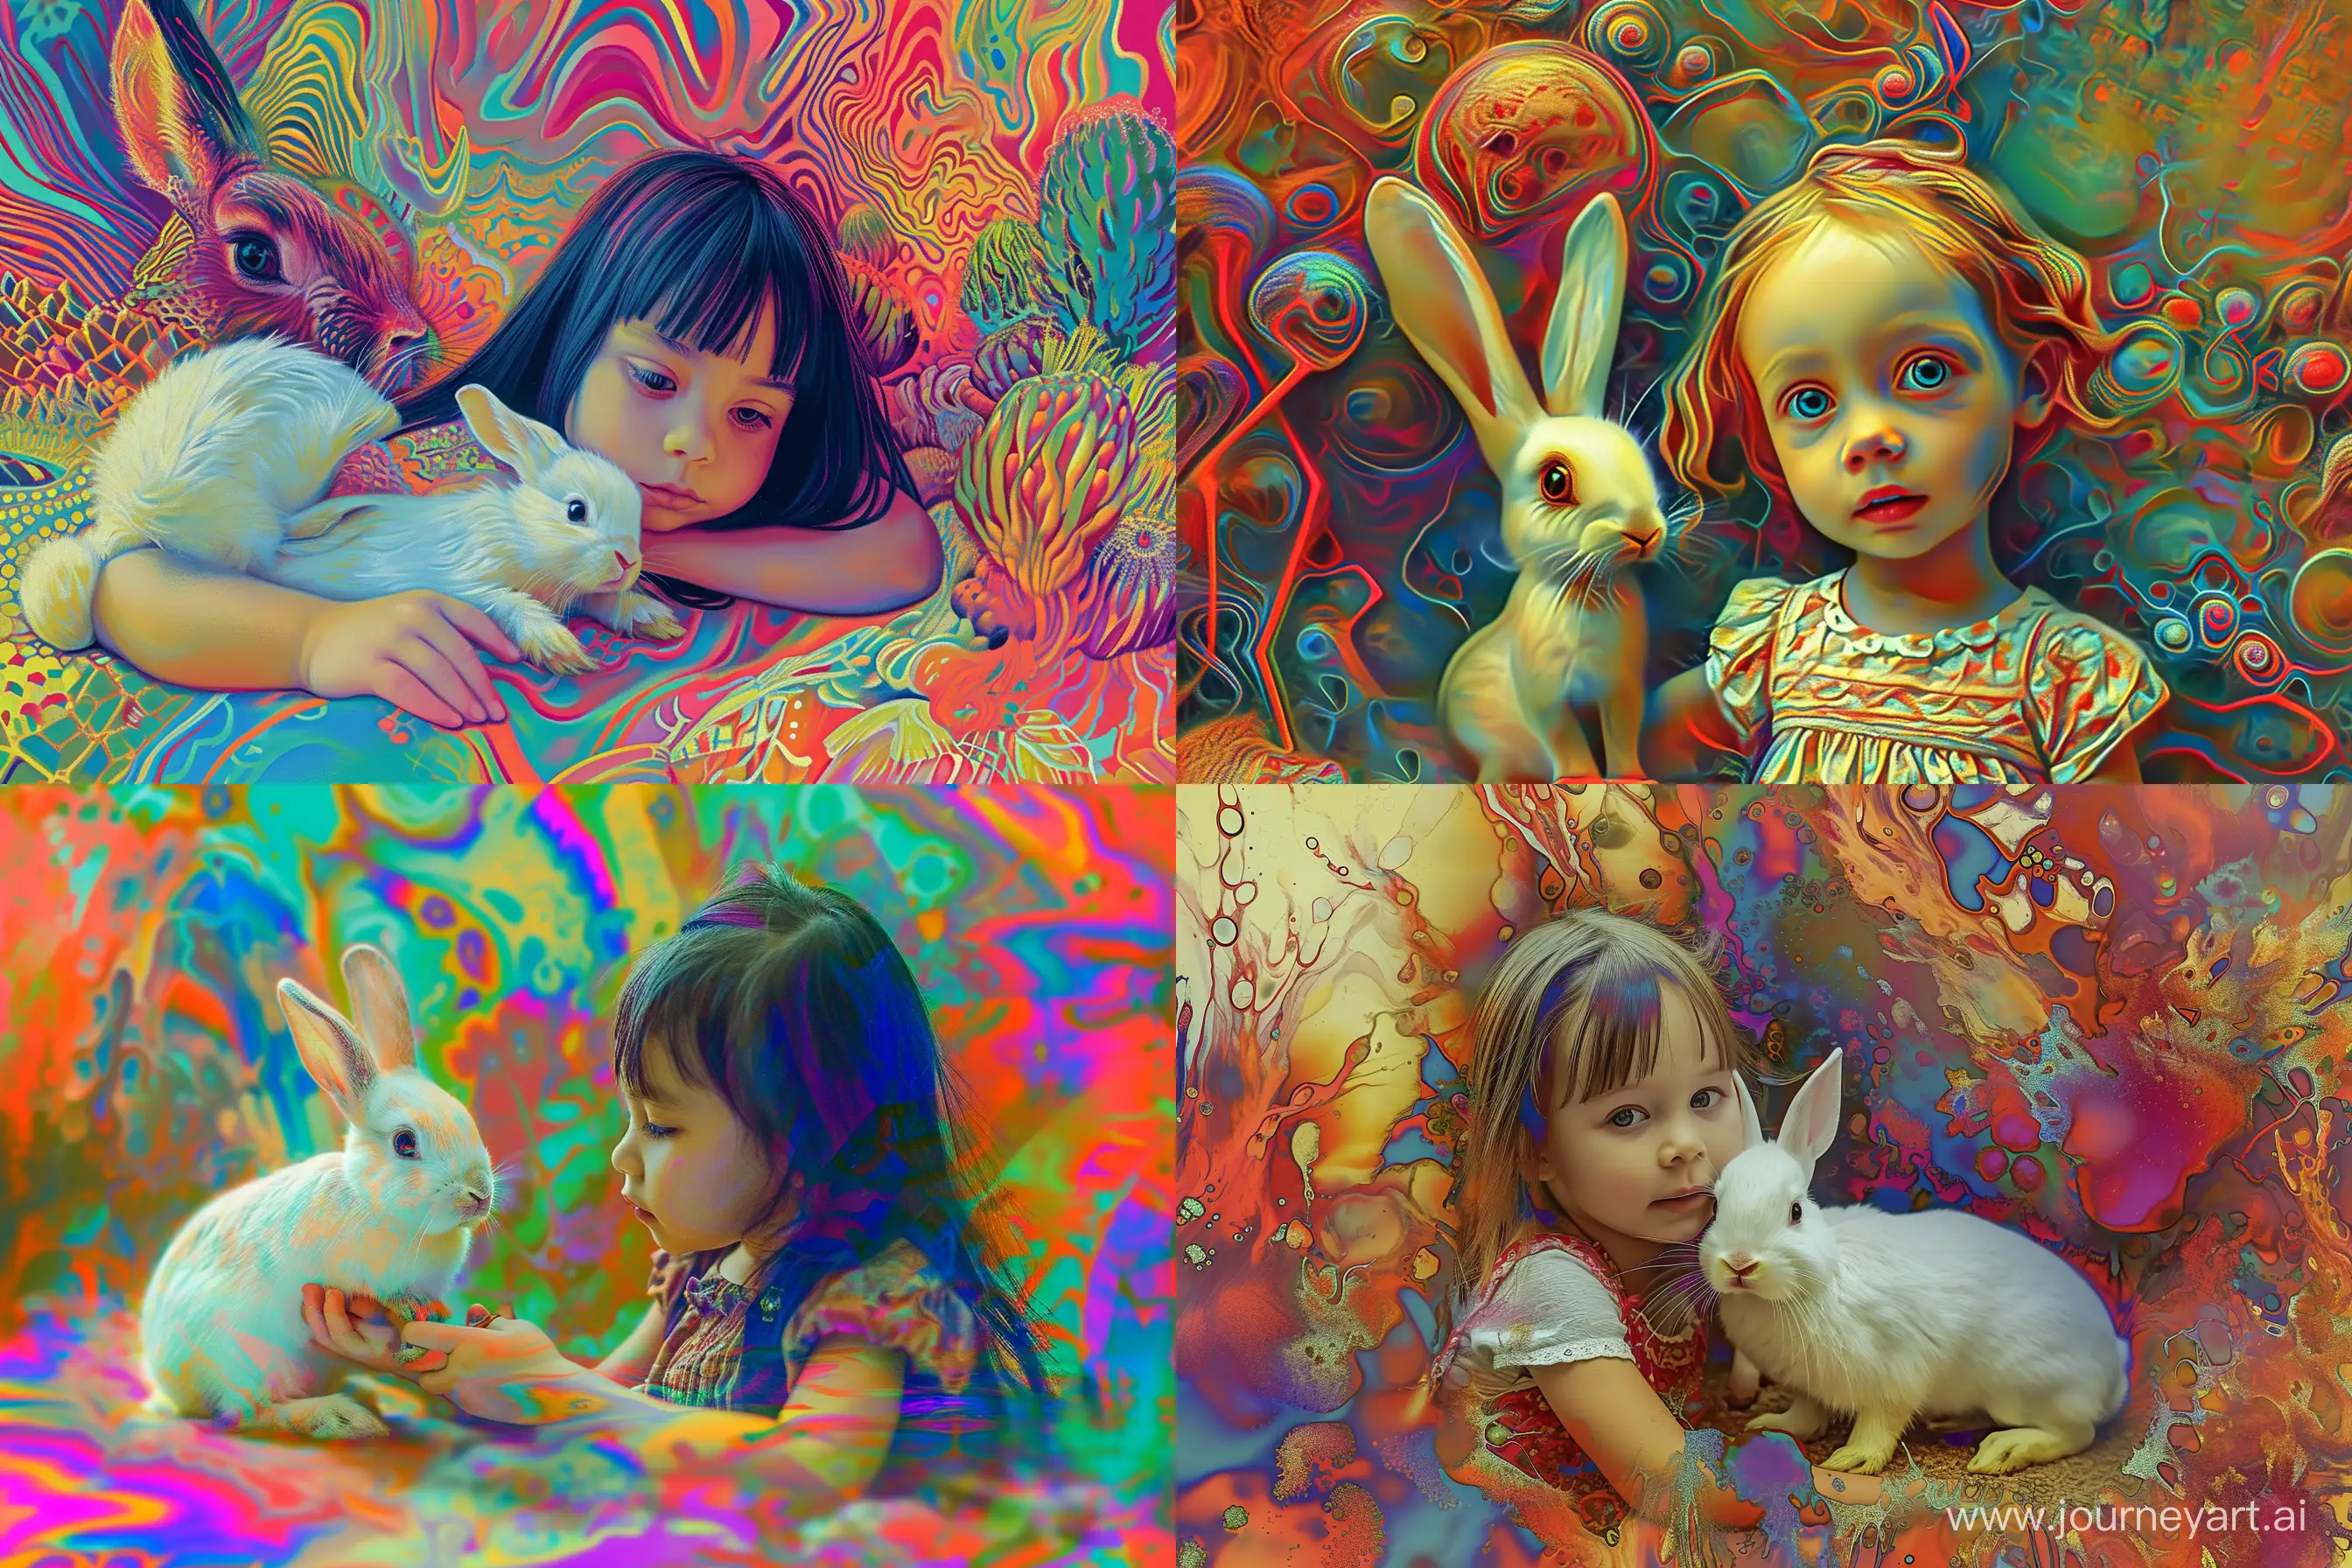 A little girl with a littl white rabbit in a vibrant and bizarre world, reminiscent of pop surrealism art. --ar 3:2